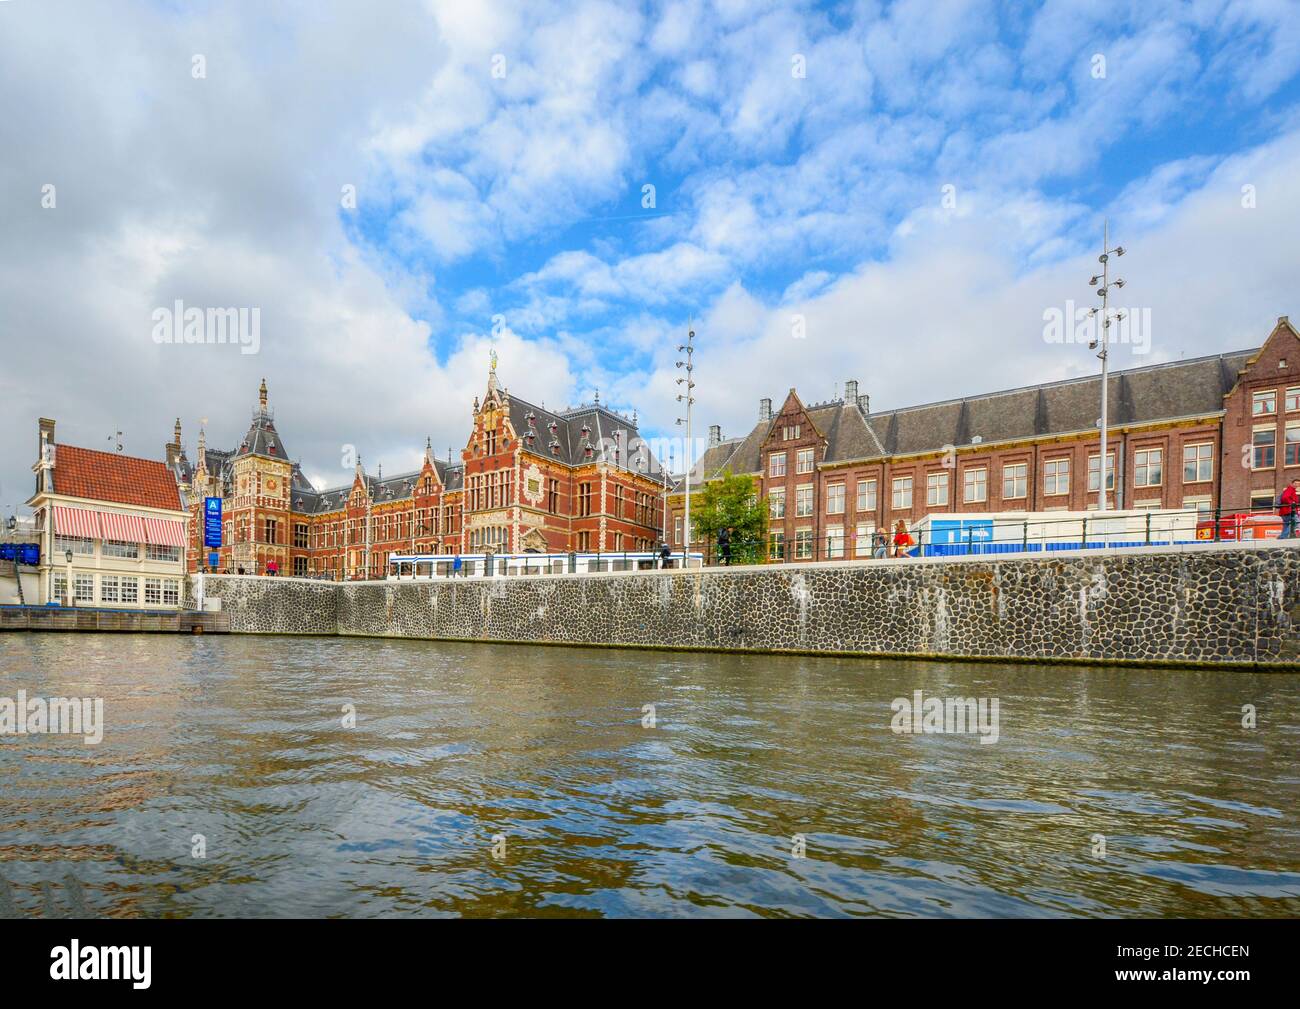 The Amsterdam Centraal Train or Railway station seen from a boat on a canal. Stock Photo